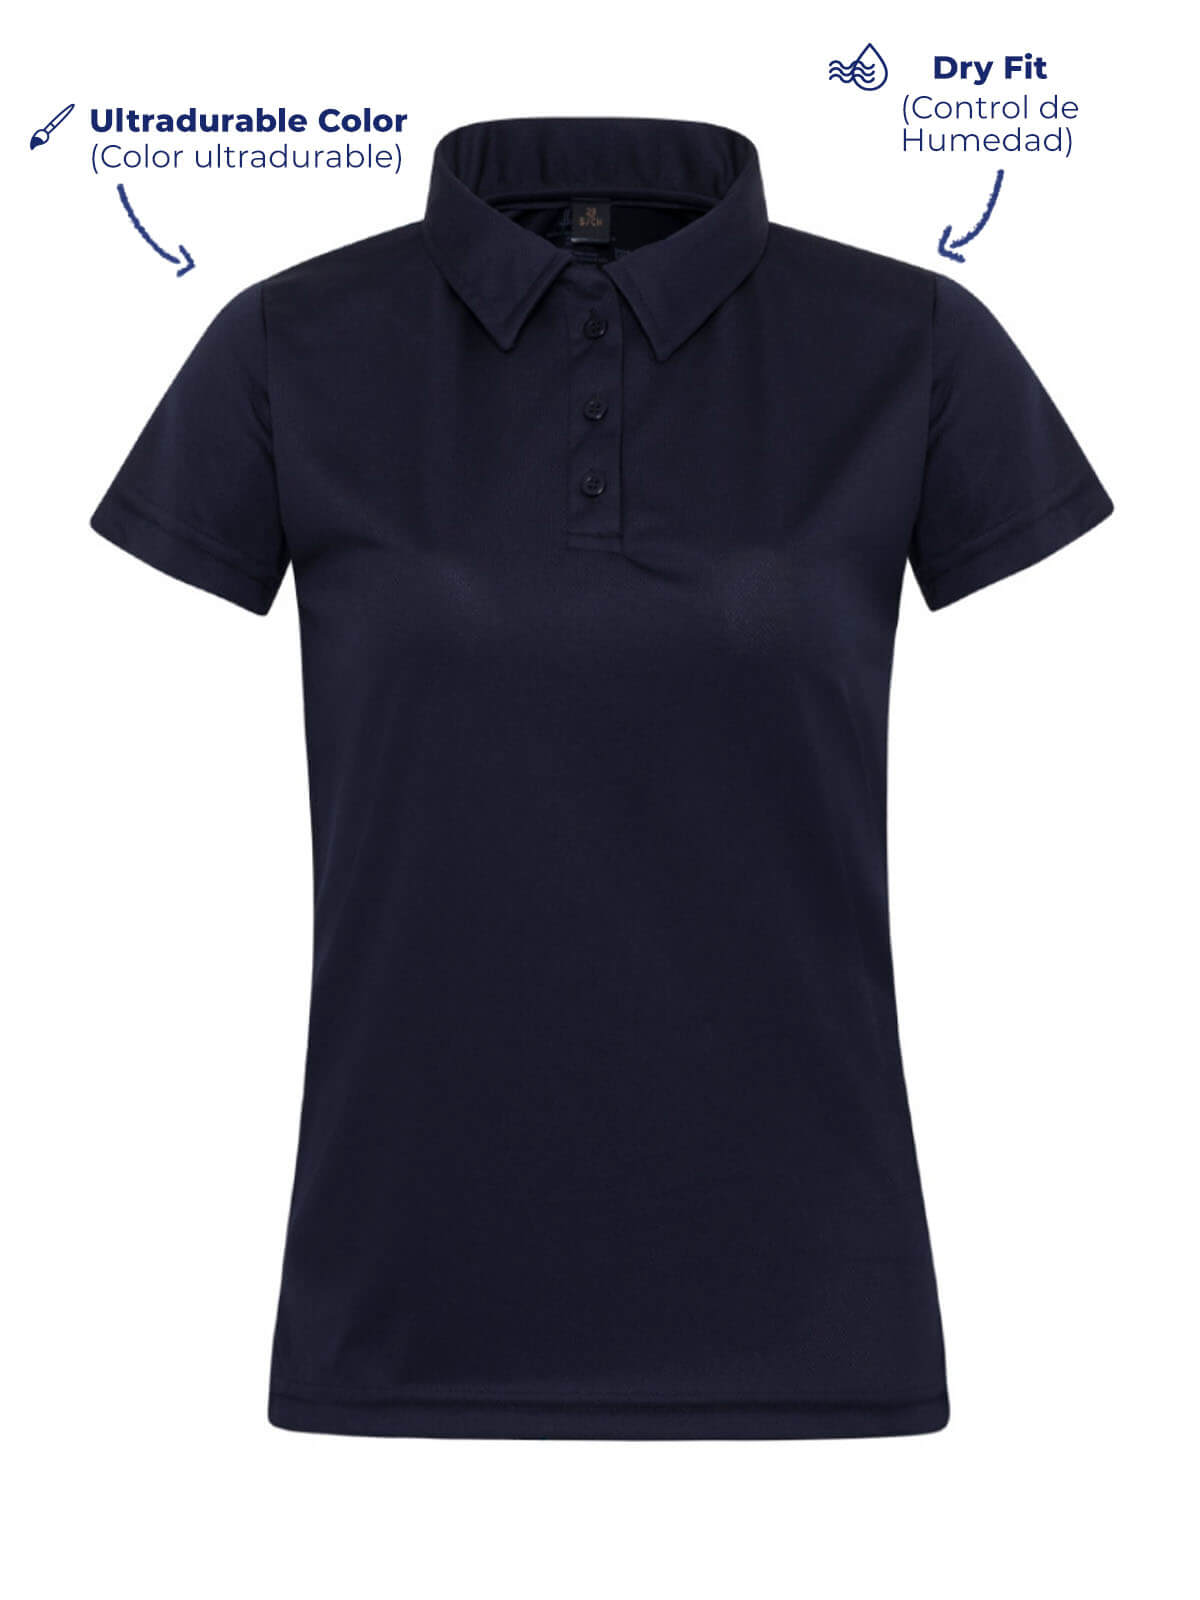 P900 navy blue polo shirt for women front view